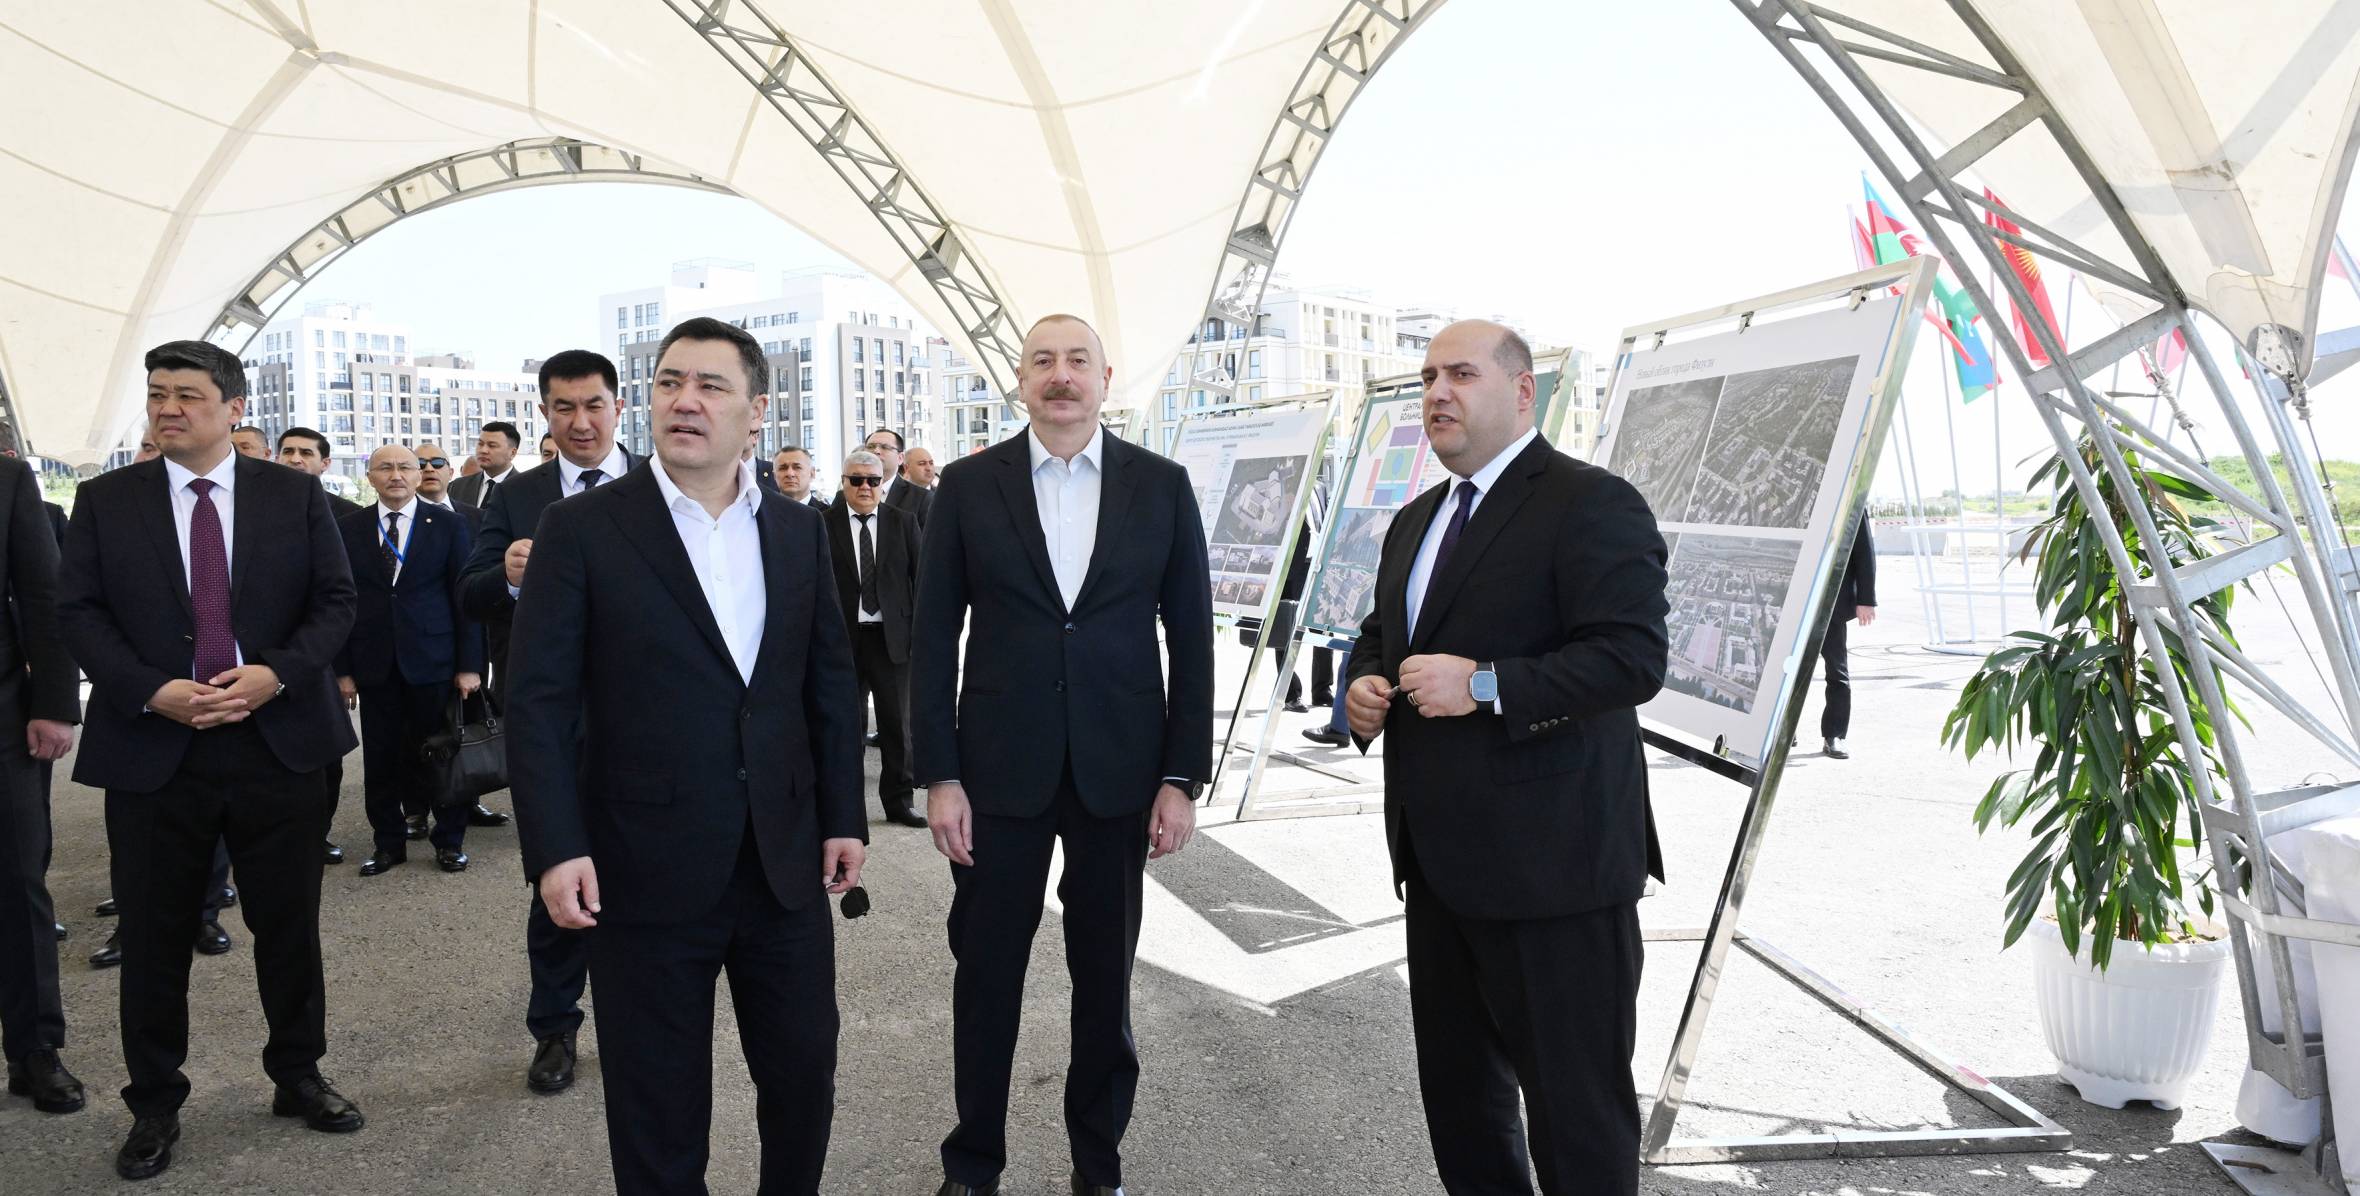 Presidents of Azerbaijan and Kyrgyzstan visited devastated areas of Fuzuli city and reviewed the city’s master plan